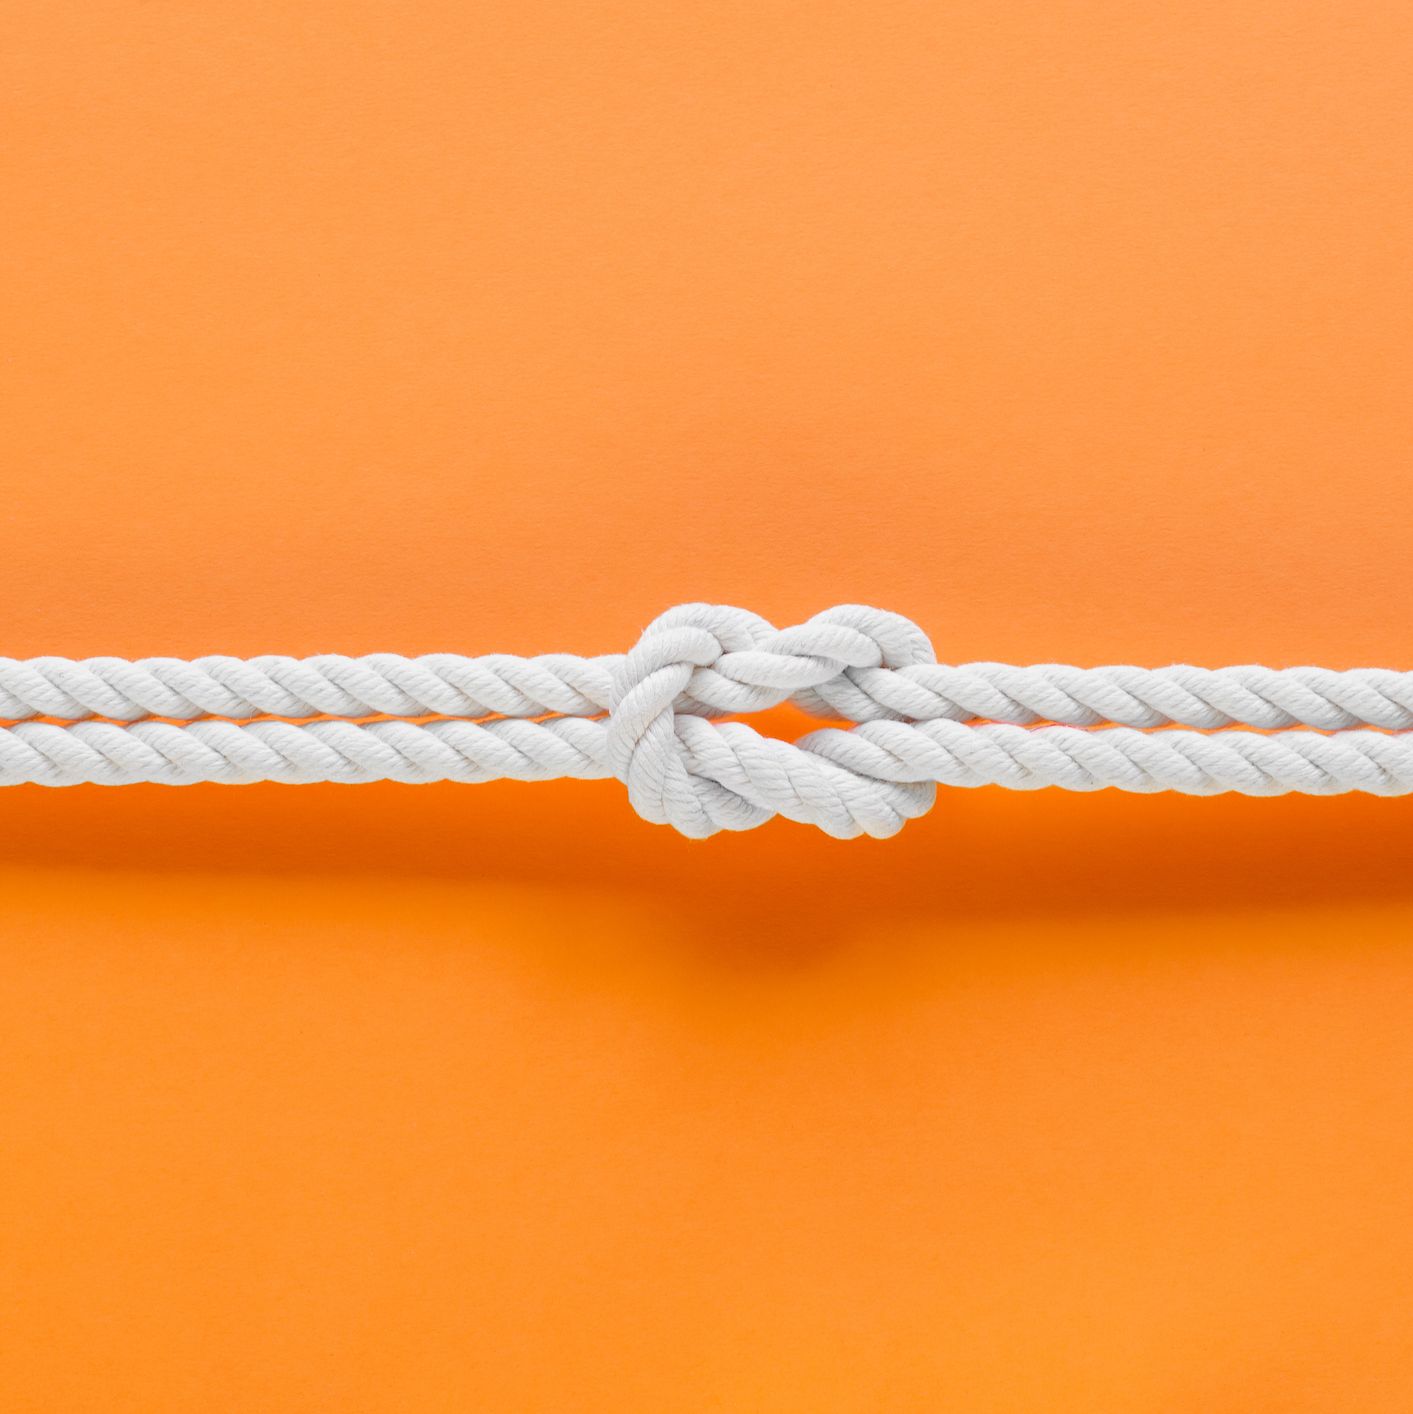 White ship ropes connected by reef knot